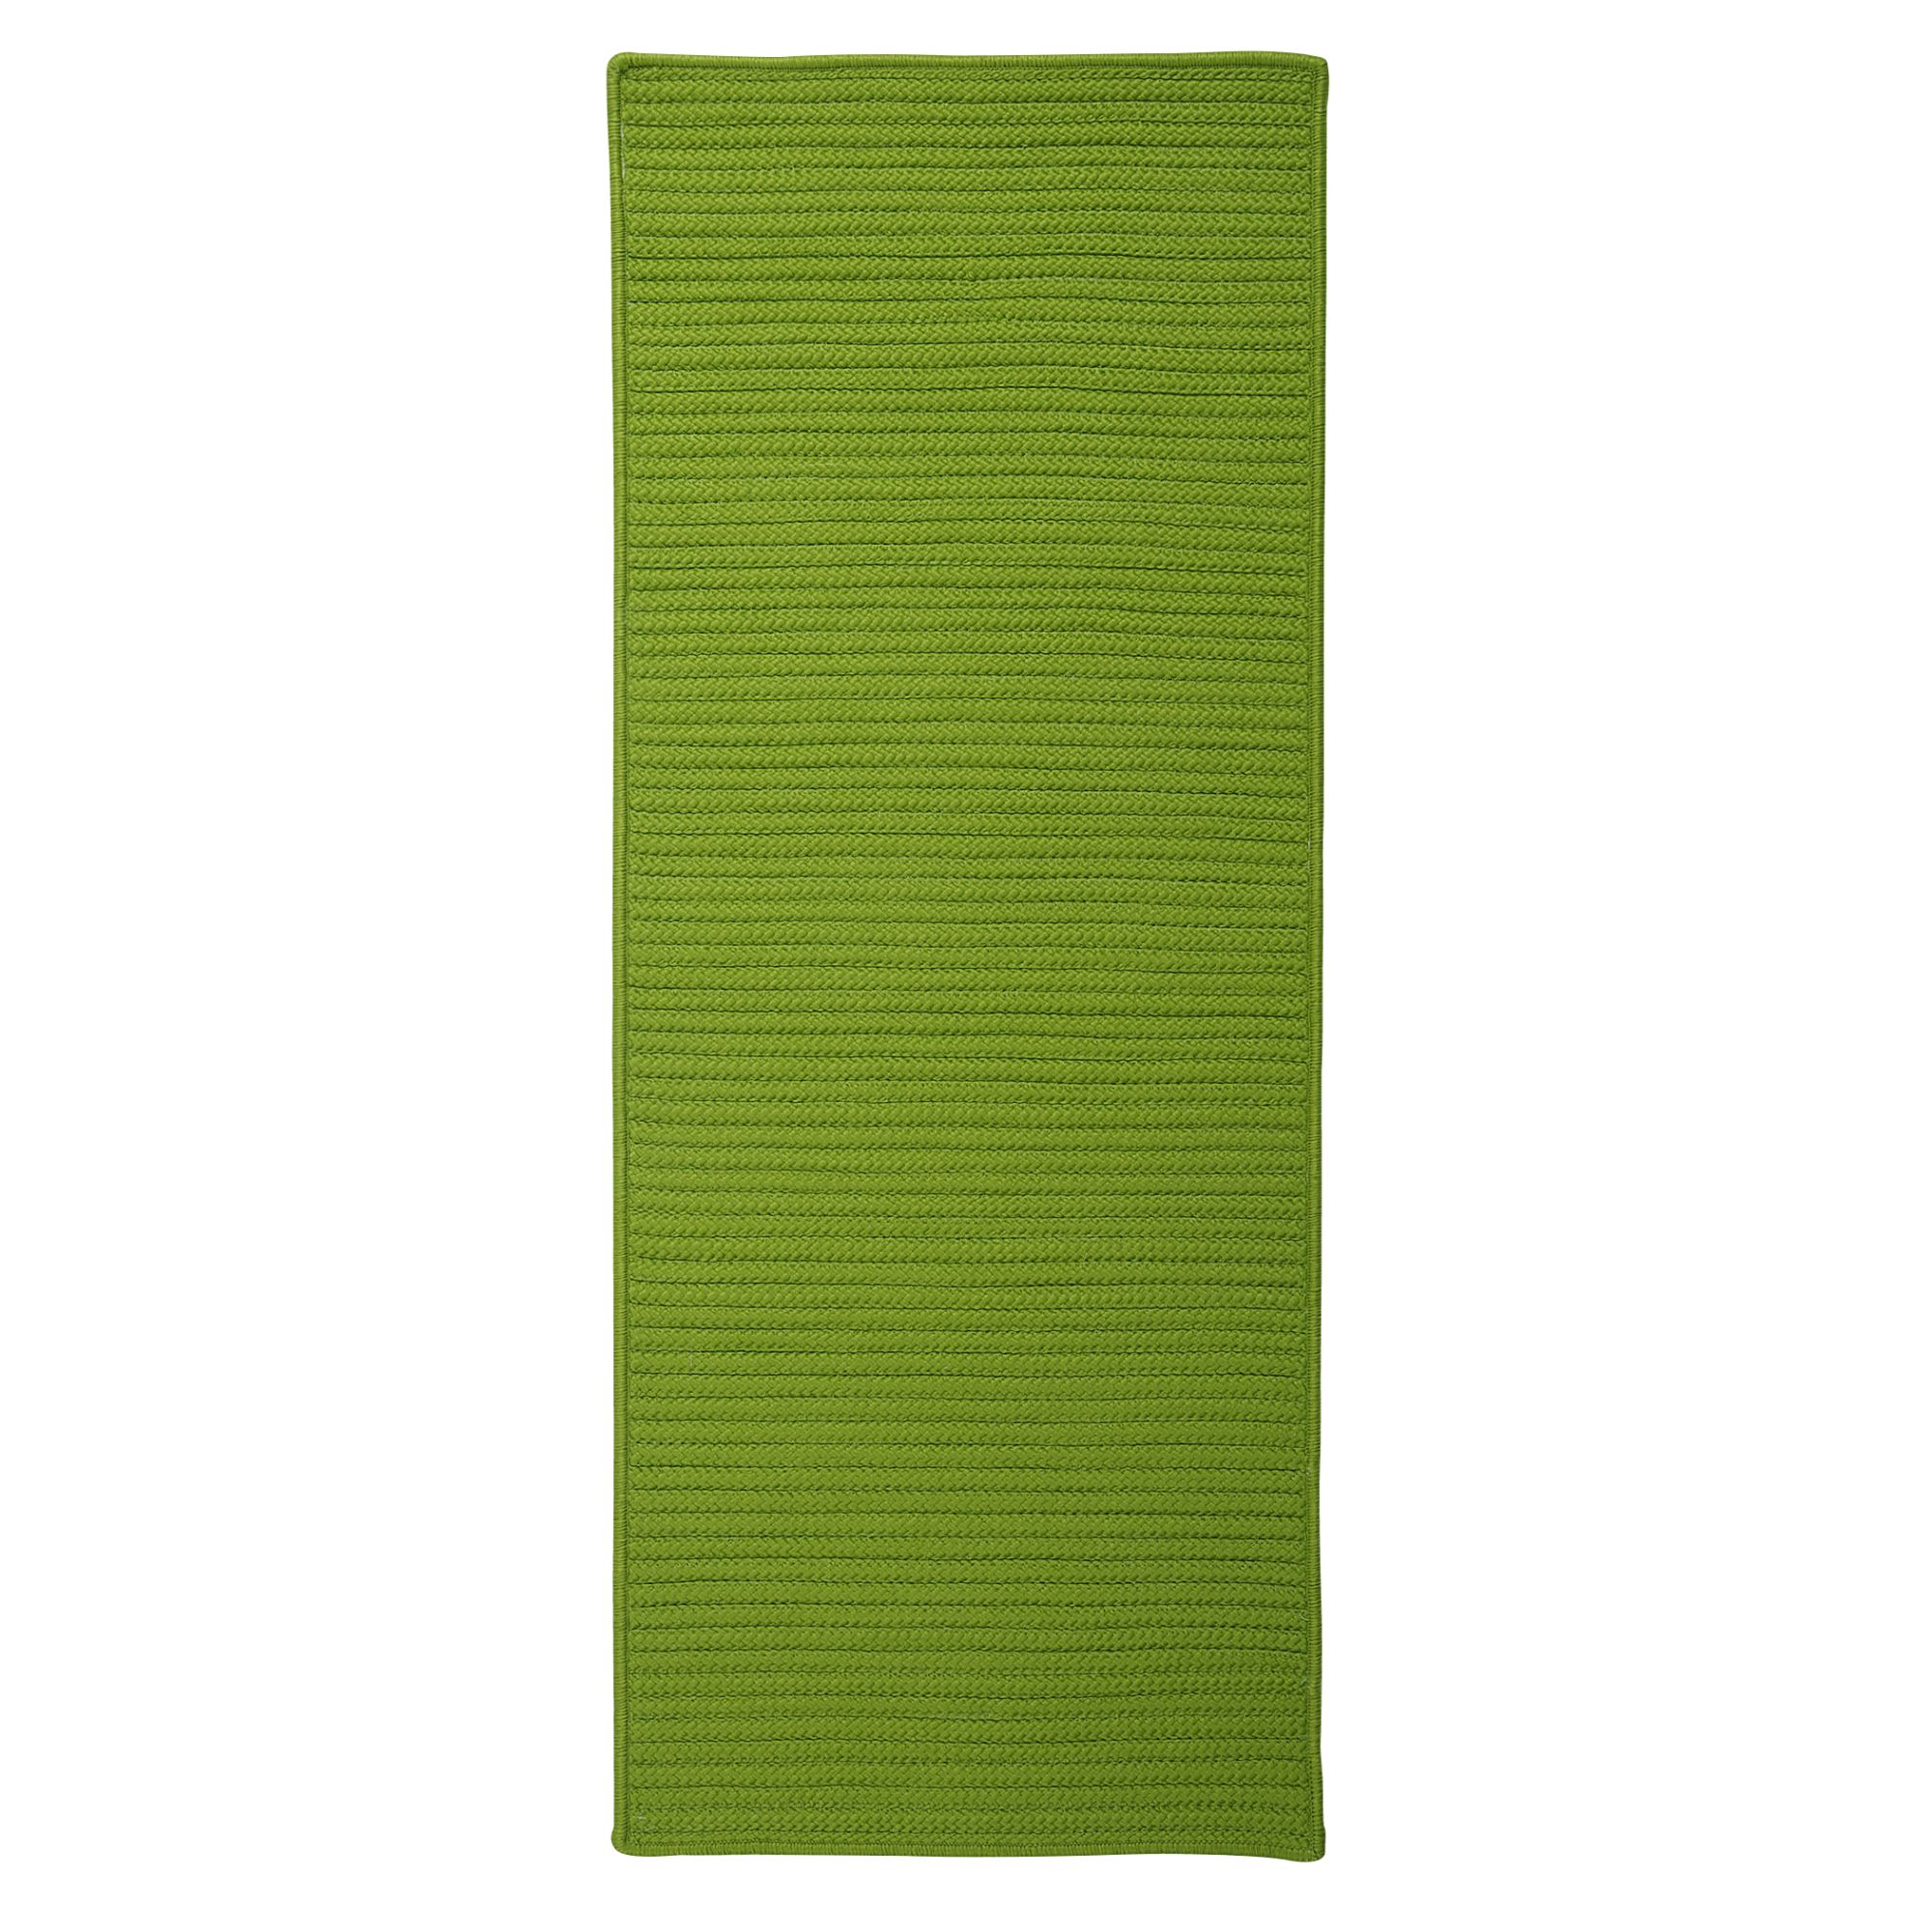 Colonial Mills 2' x 4' Green Handcrafted Reversible Outdoor Area Throw Rug